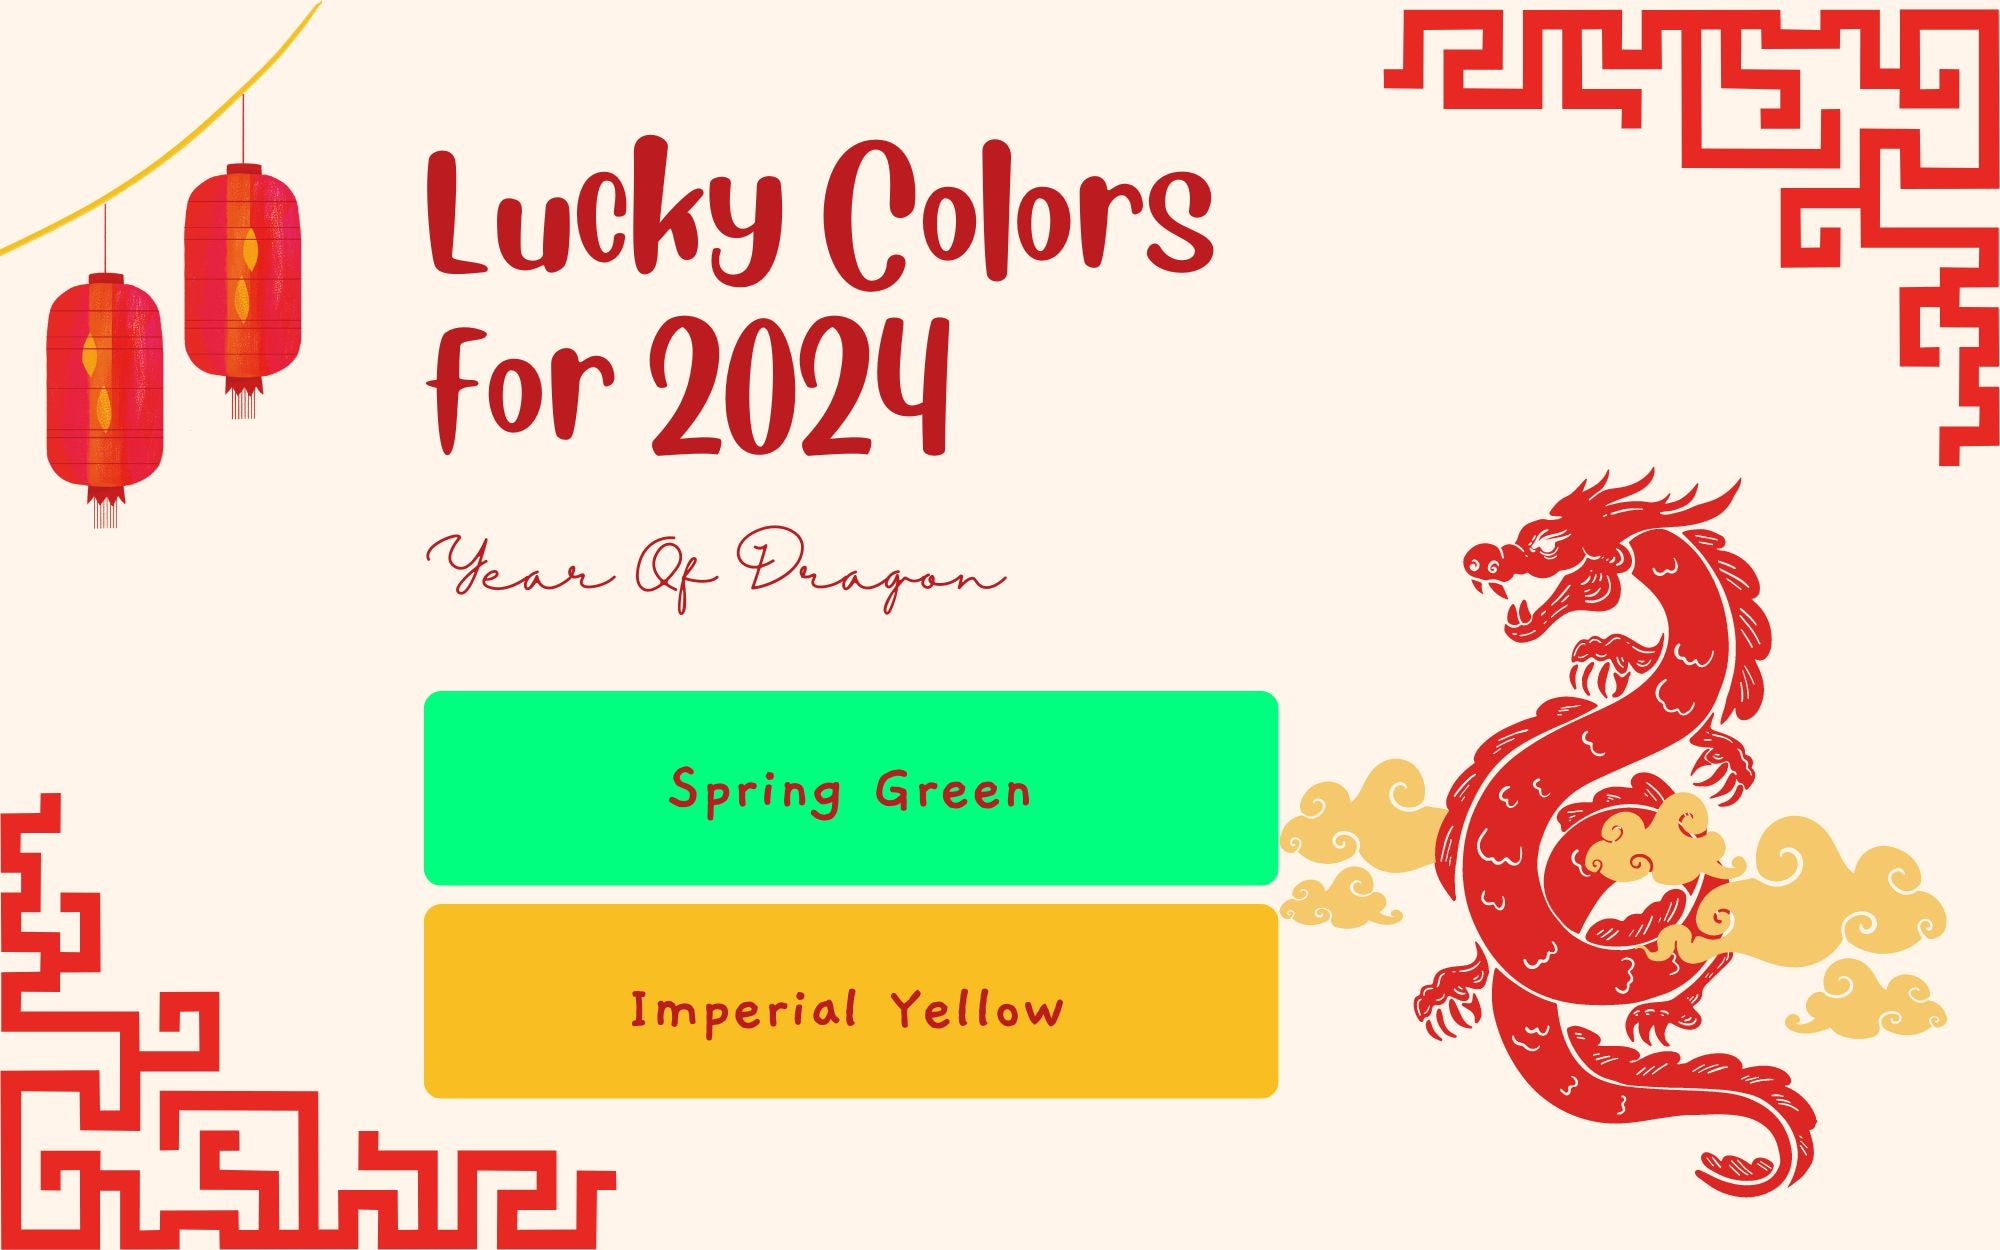 New Year 2024 - What colors to wear to have happiness and success